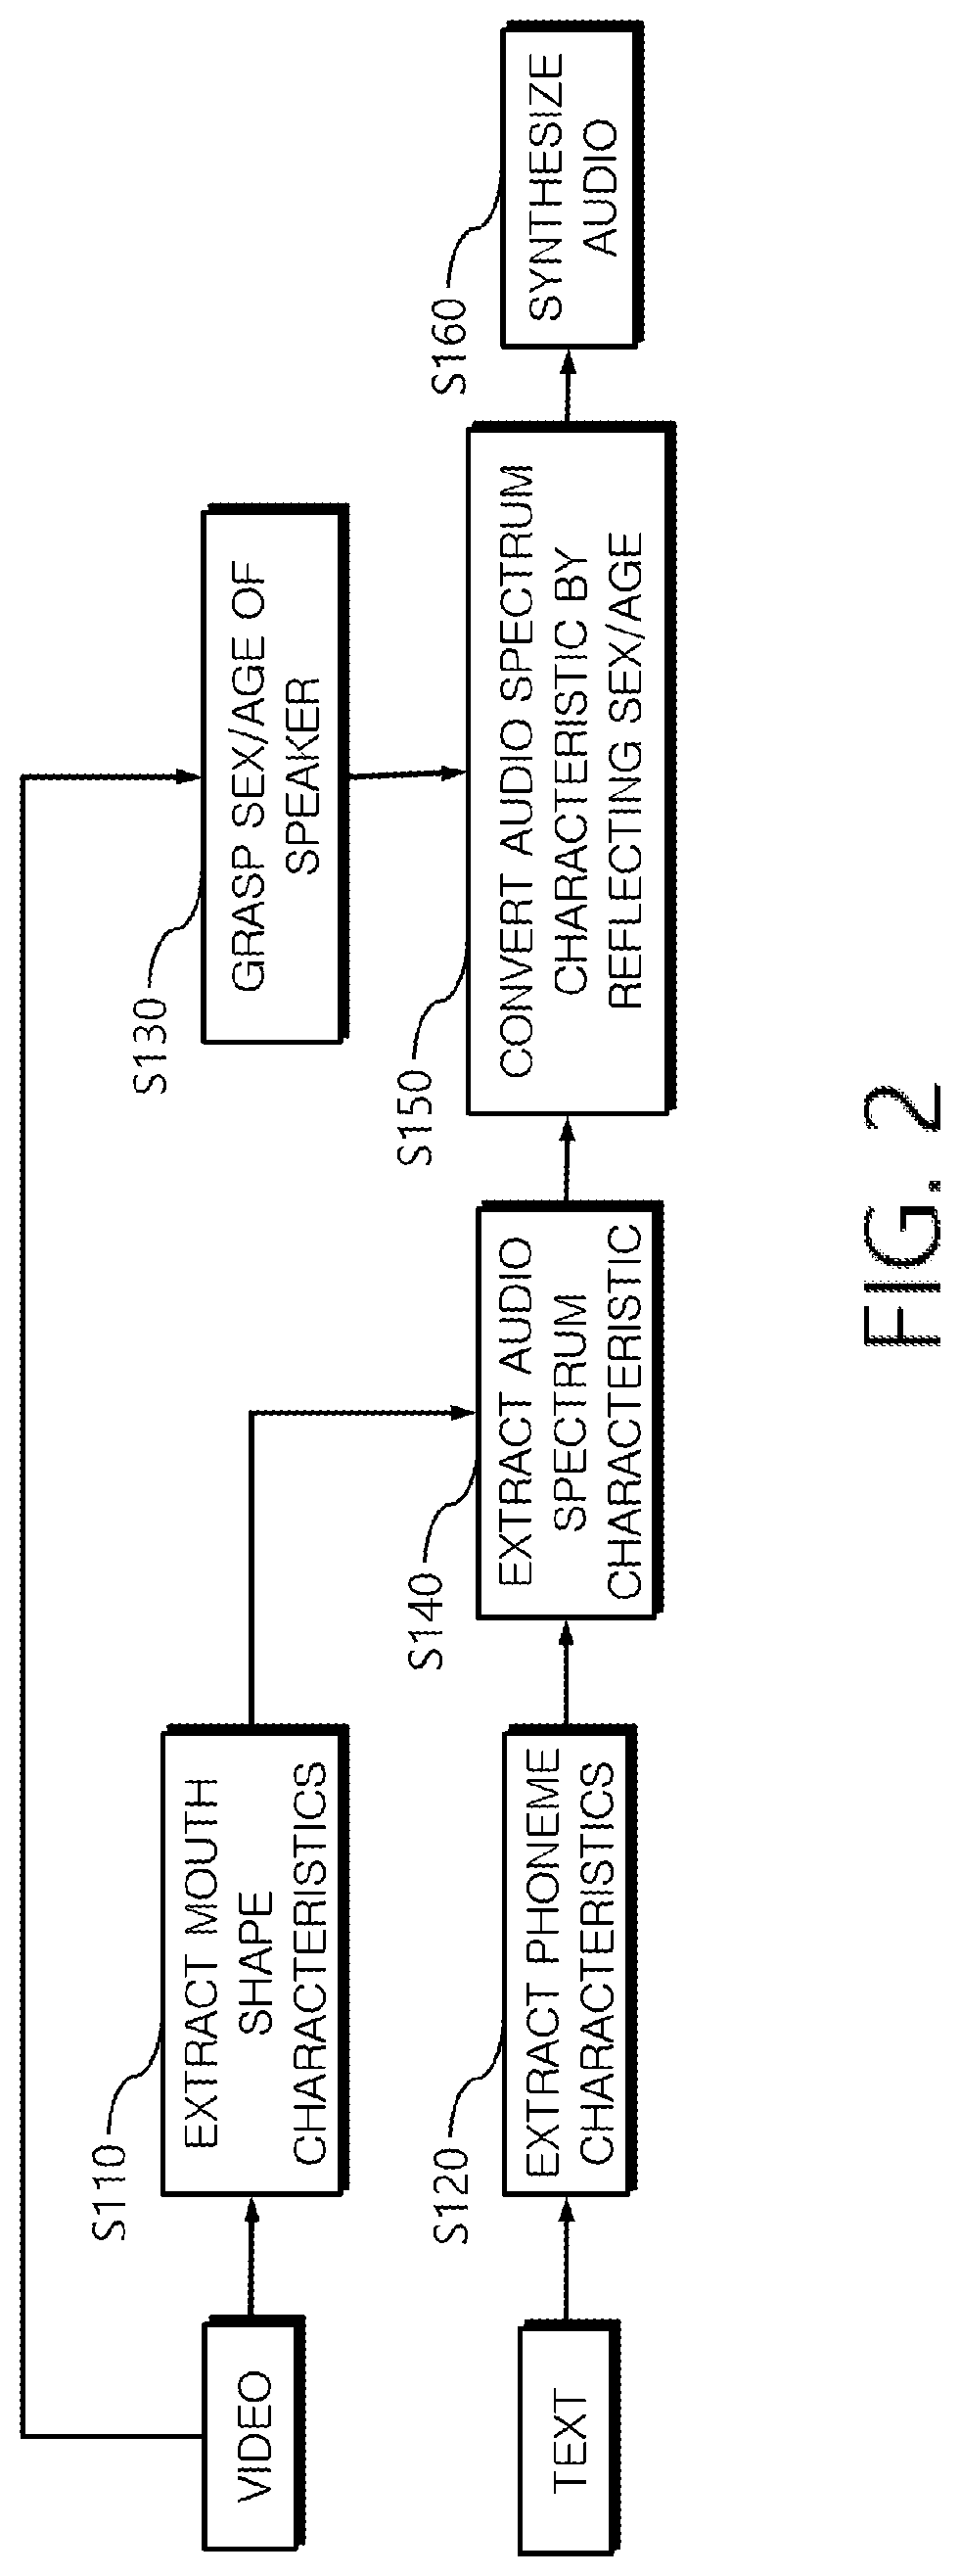 Method for audio synthesis adapted to video characteristics